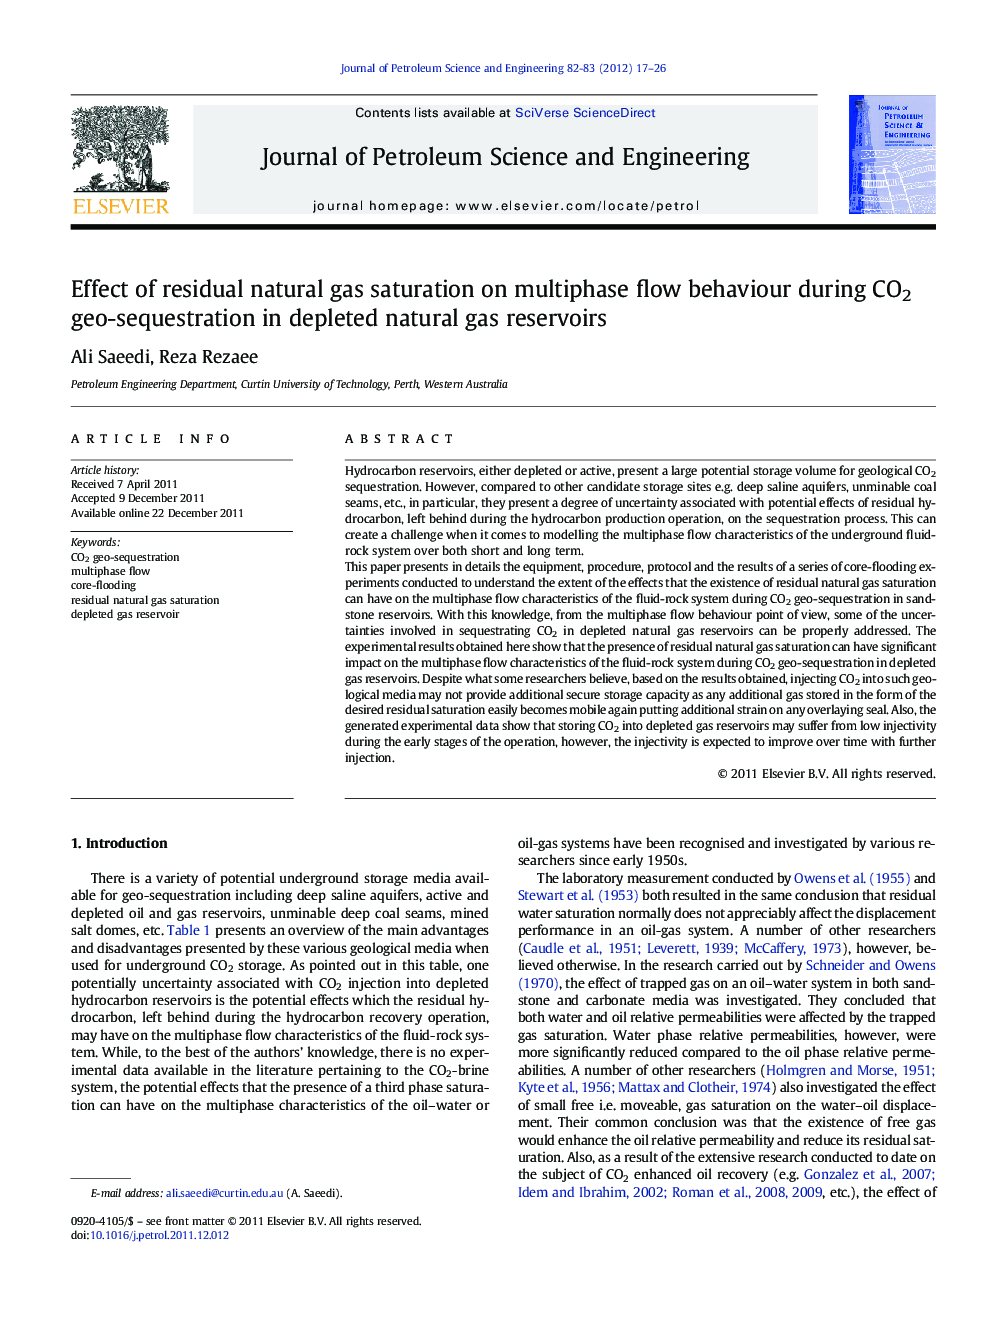 Effect of residual natural gas saturation on multiphase flow behaviour during CO2 geo-sequestration in depleted natural gas reservoirs